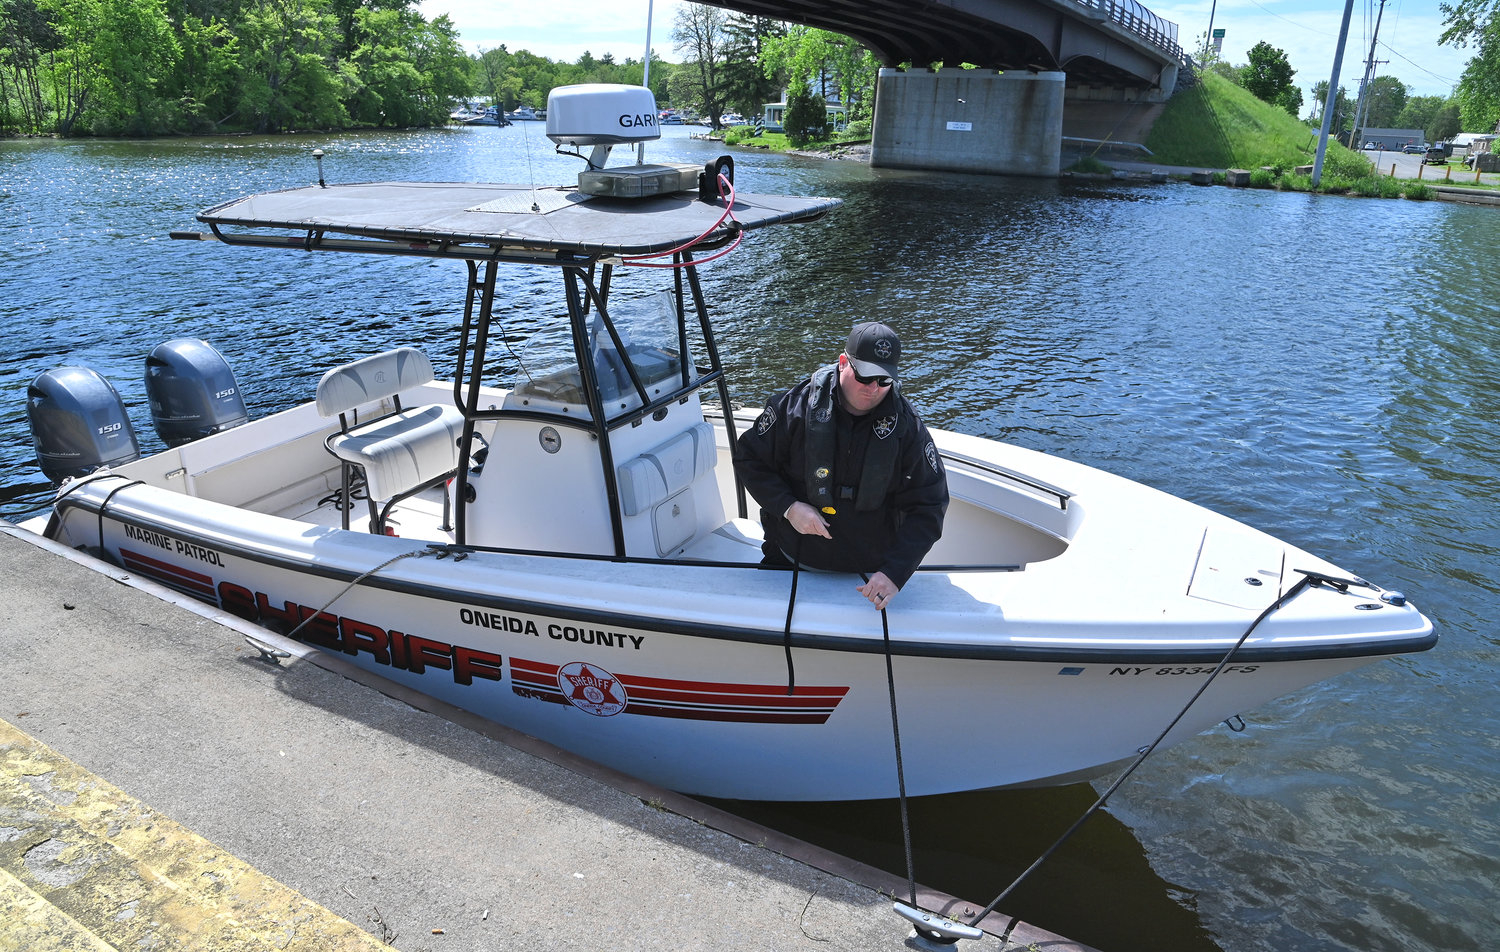 Sheriff's Sgt. Scott Kahl ties up one of the Marine Patrol's boats at the canal in Sylvan Beach Tuesday morning. The Marine Patrol has five boats in total, and they patrol all lakes in Oneida County every summer.